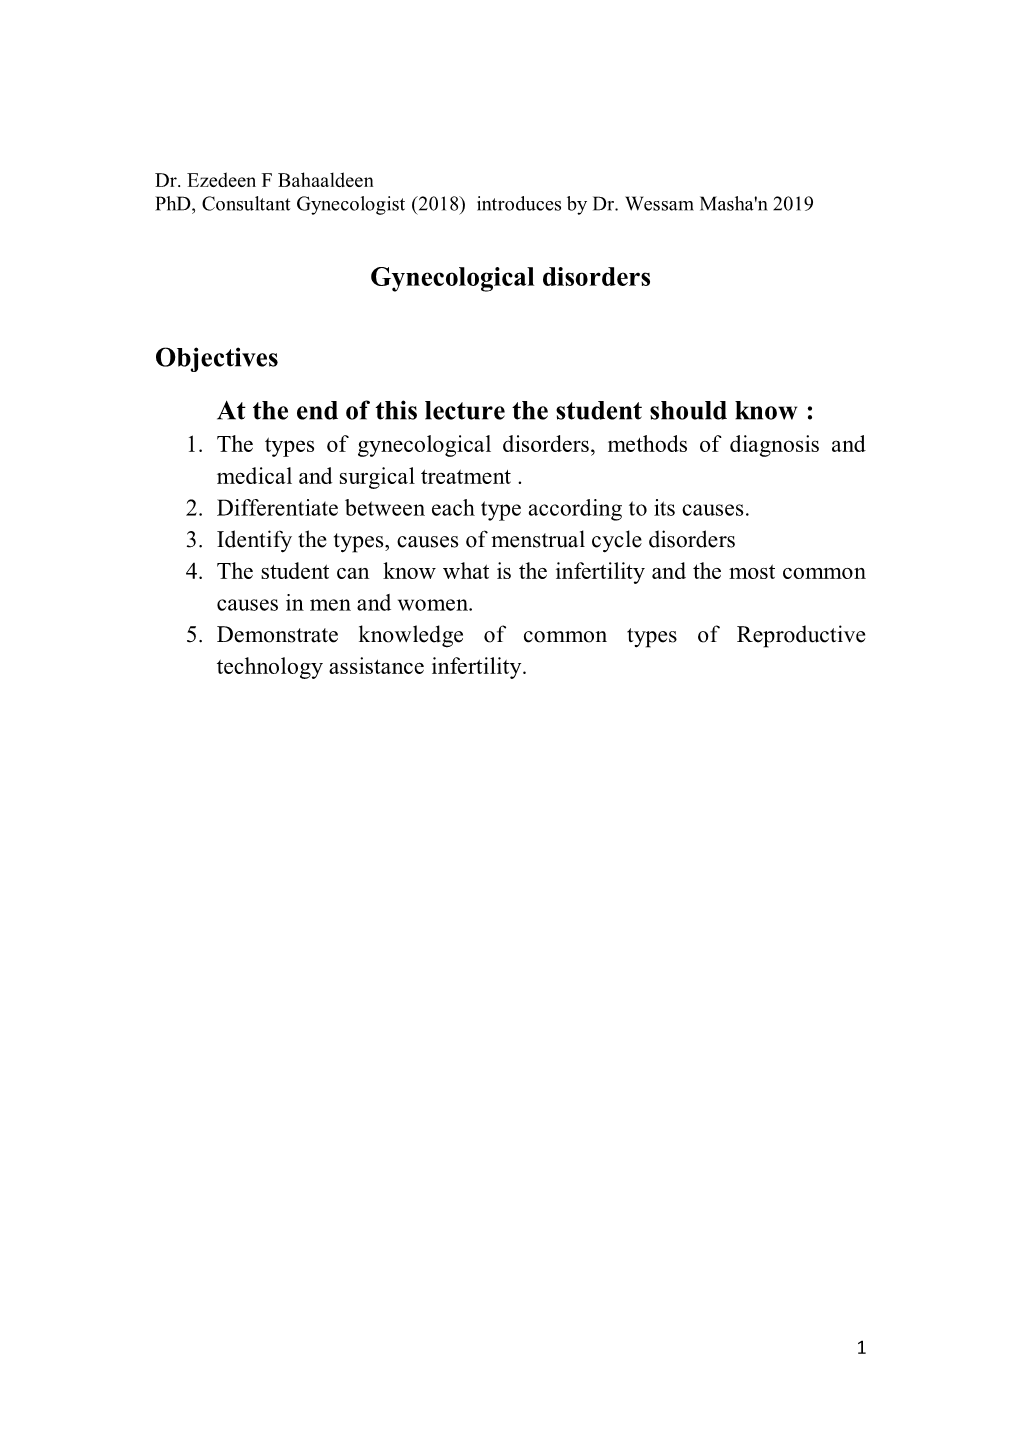 Gynecological Disorders Objectives at the End of This Lecture the Student